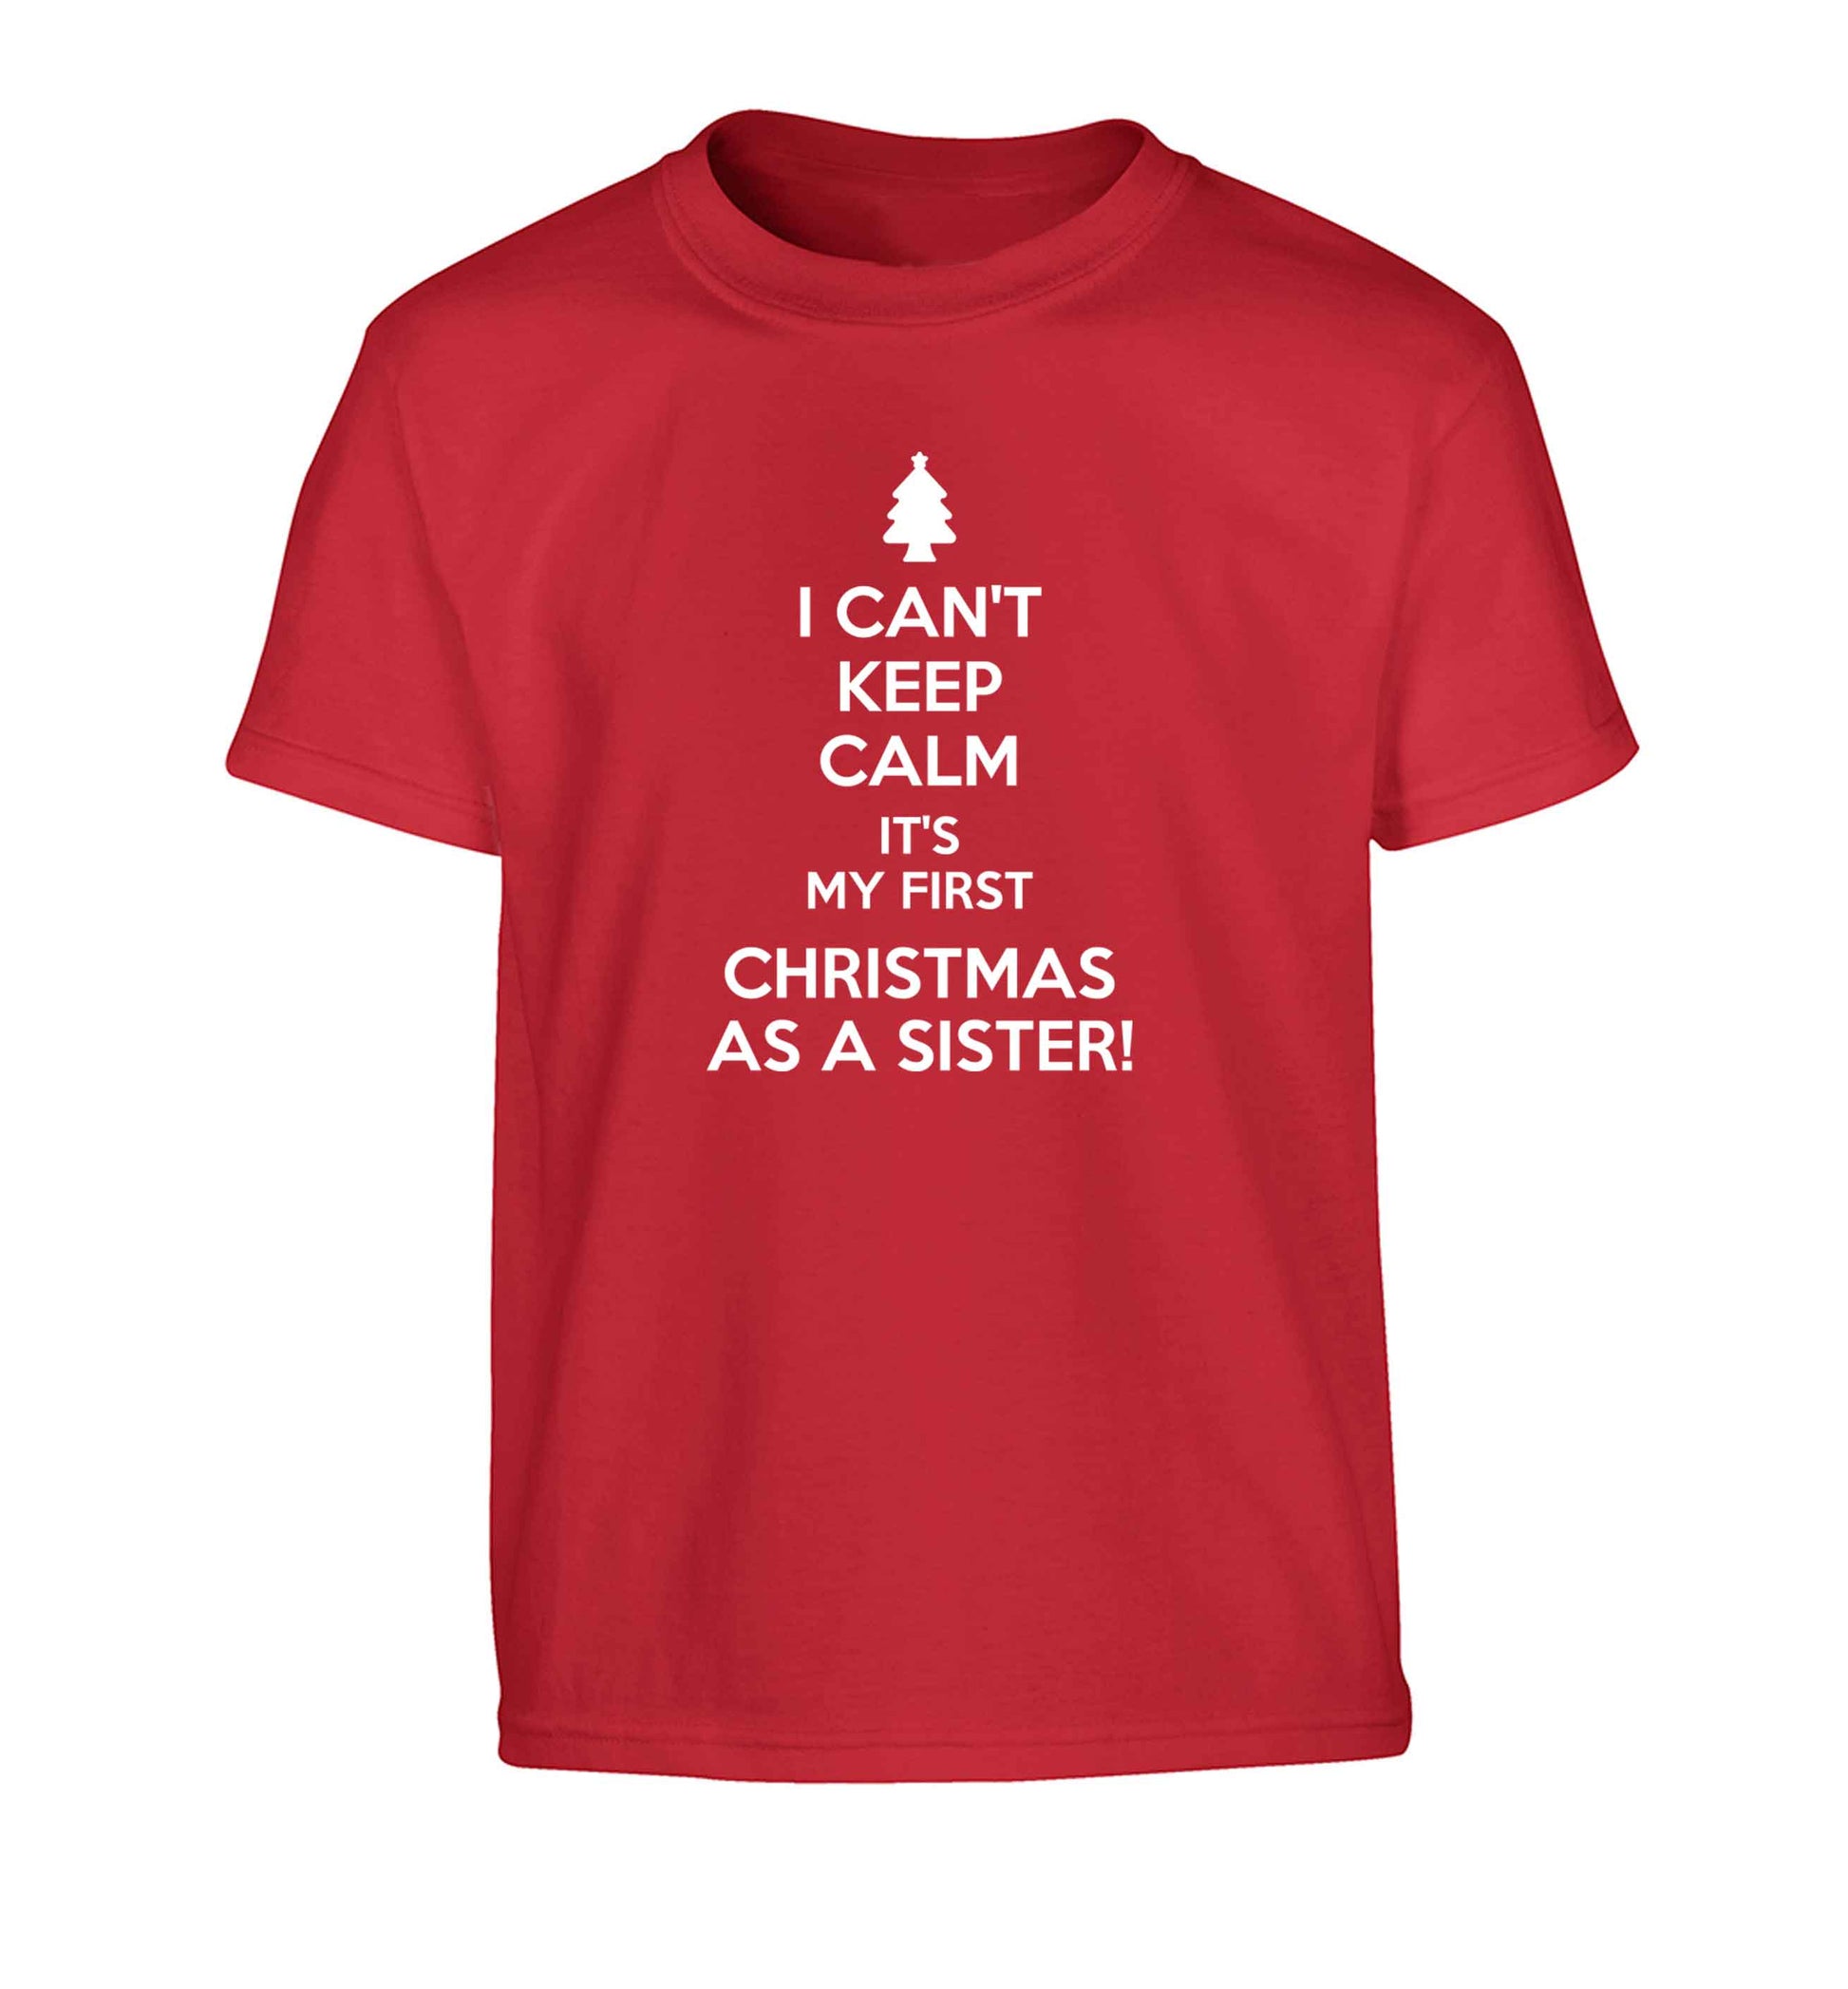 I can't keep calm it's my first Christmas as a sister! Children's red Tshirt 12-13 Years